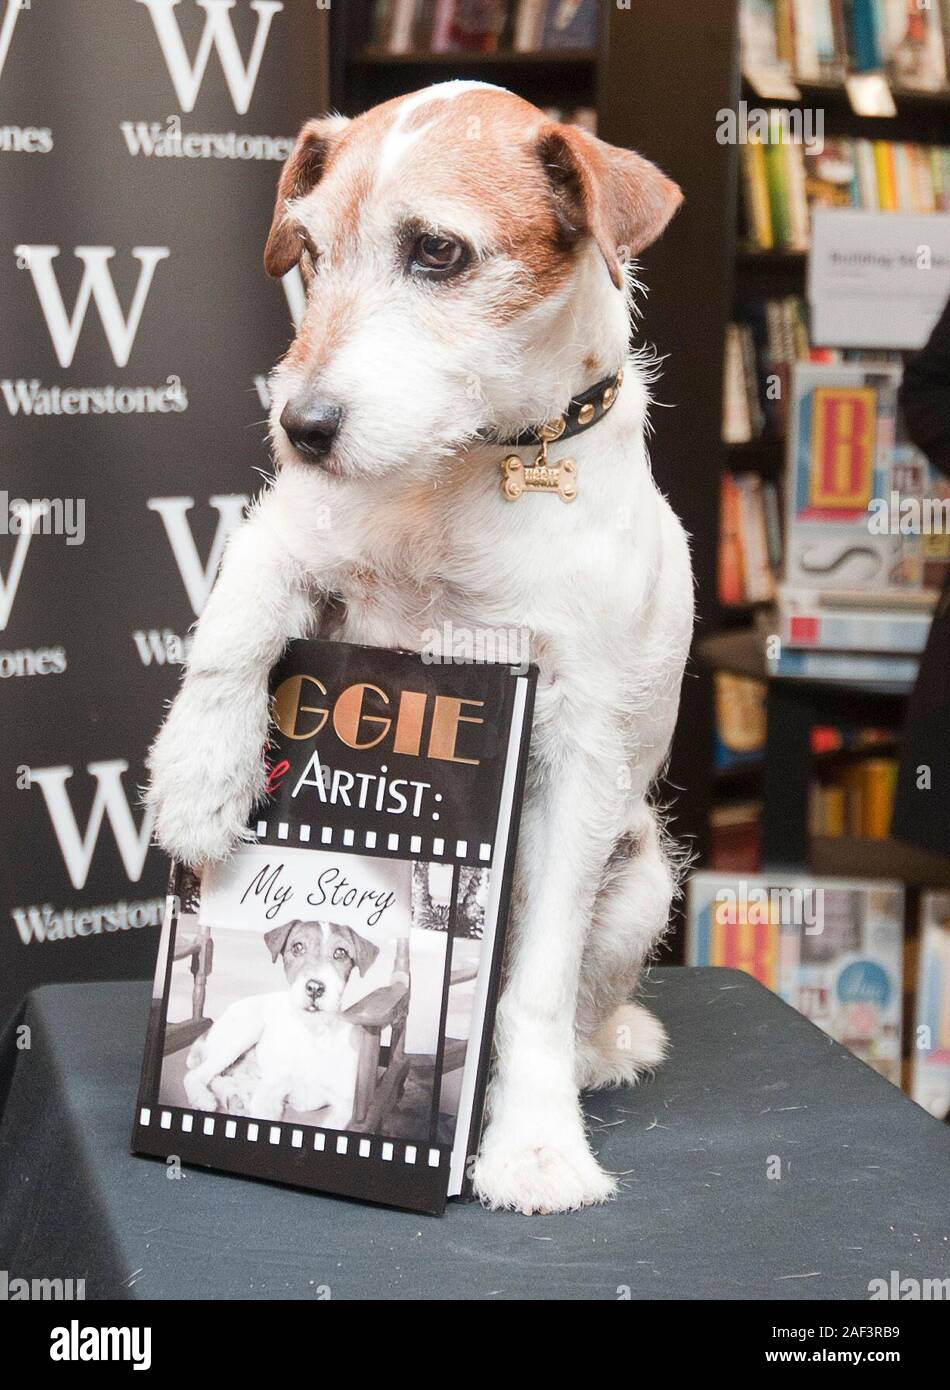 Uggie' the Jack Russell star of the film The Artist' making a public  appearance for the launch of his biography 'Uggie My Story' at Waterstones  in Kensington Stock Photo - Alamy